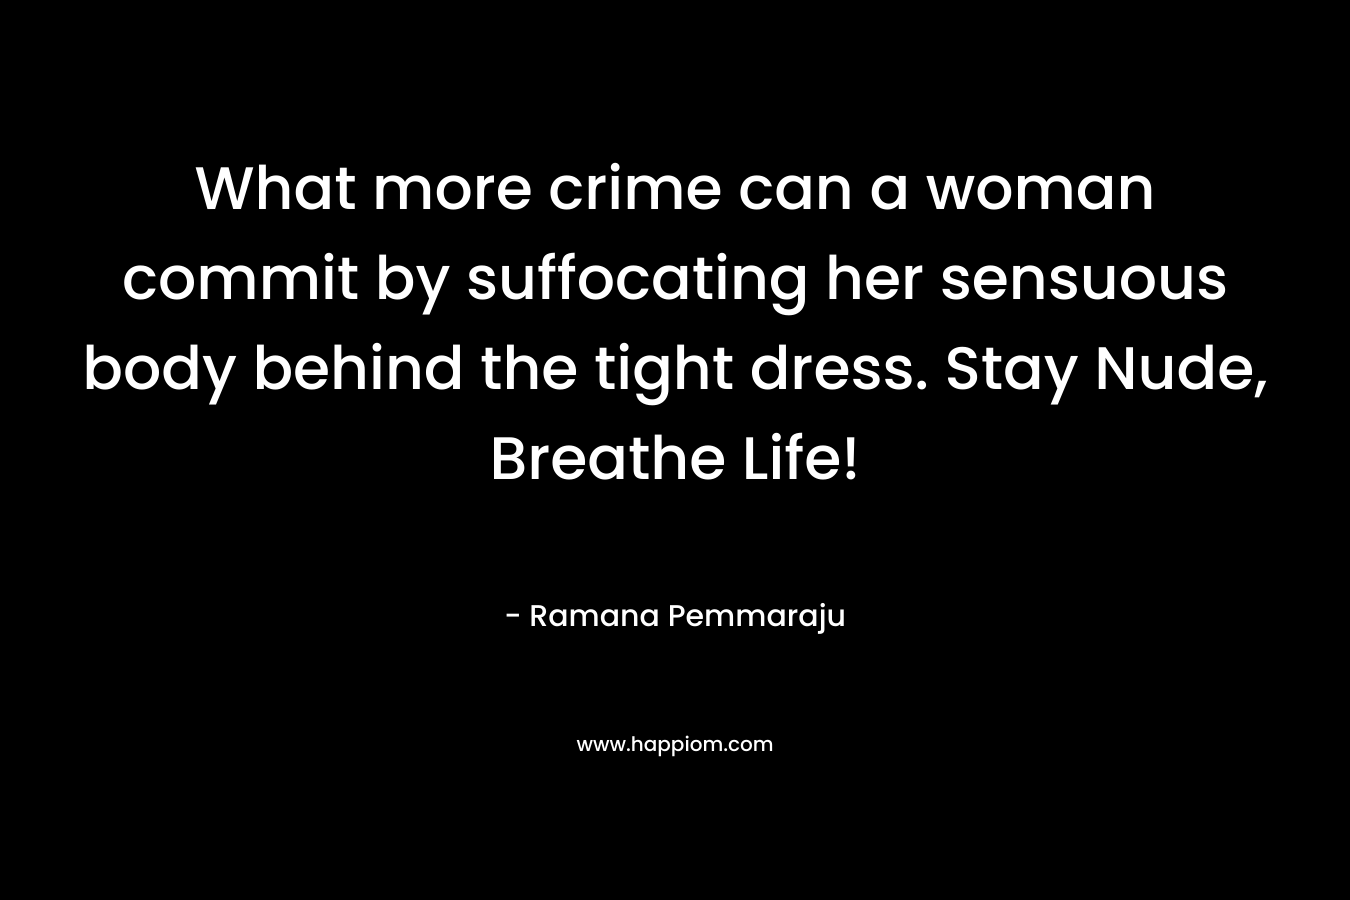 What more crime can a woman commit by suffocating her sensuous body behind the tight dress. Stay Nude, Breathe Life!